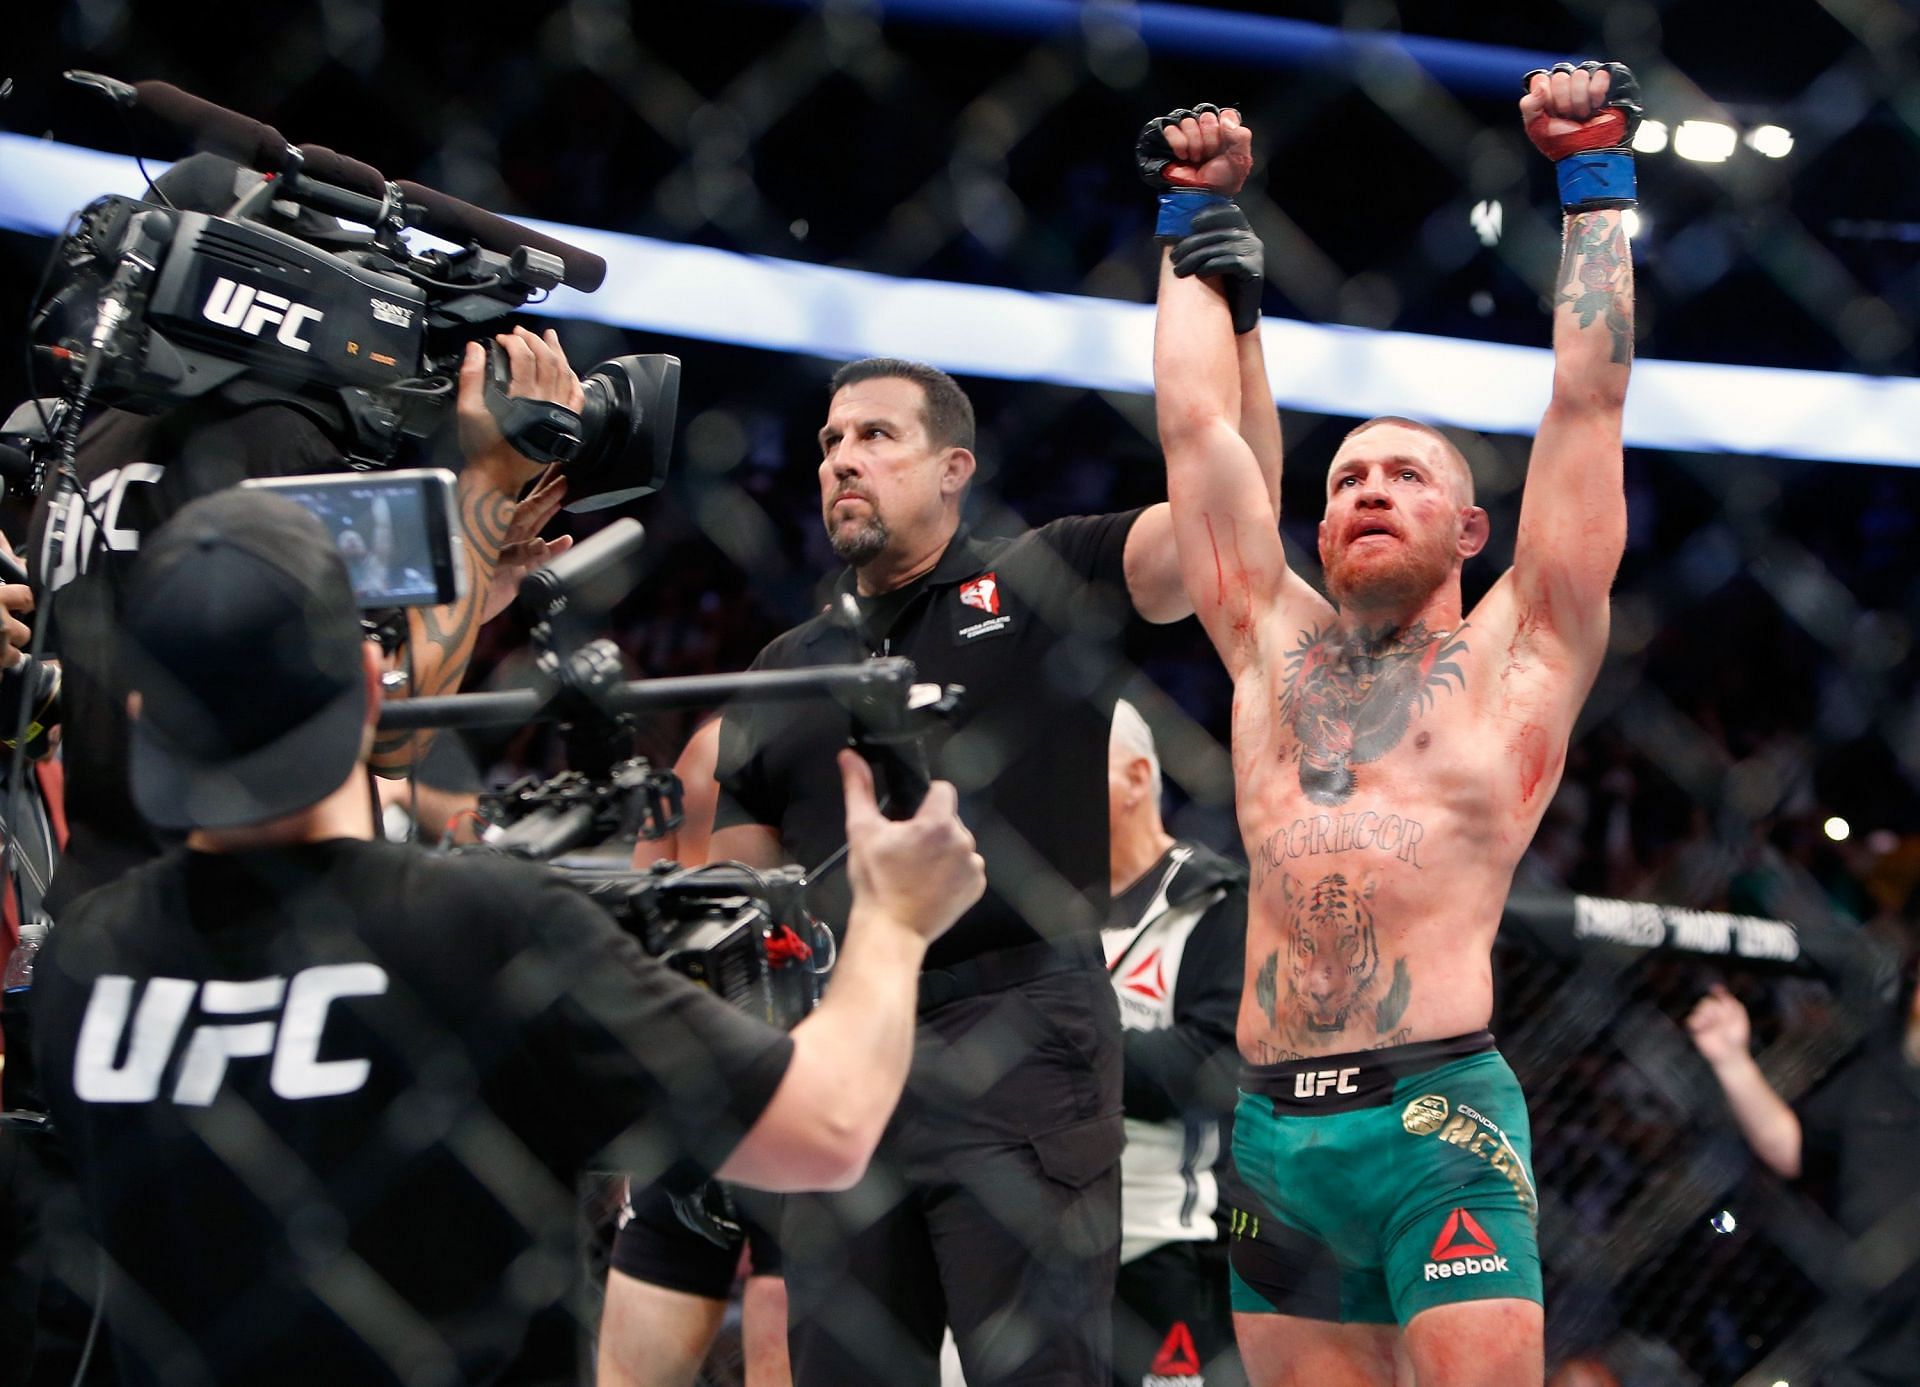 Conor McGregor emerges victorious in the second fight with Nate Diaz